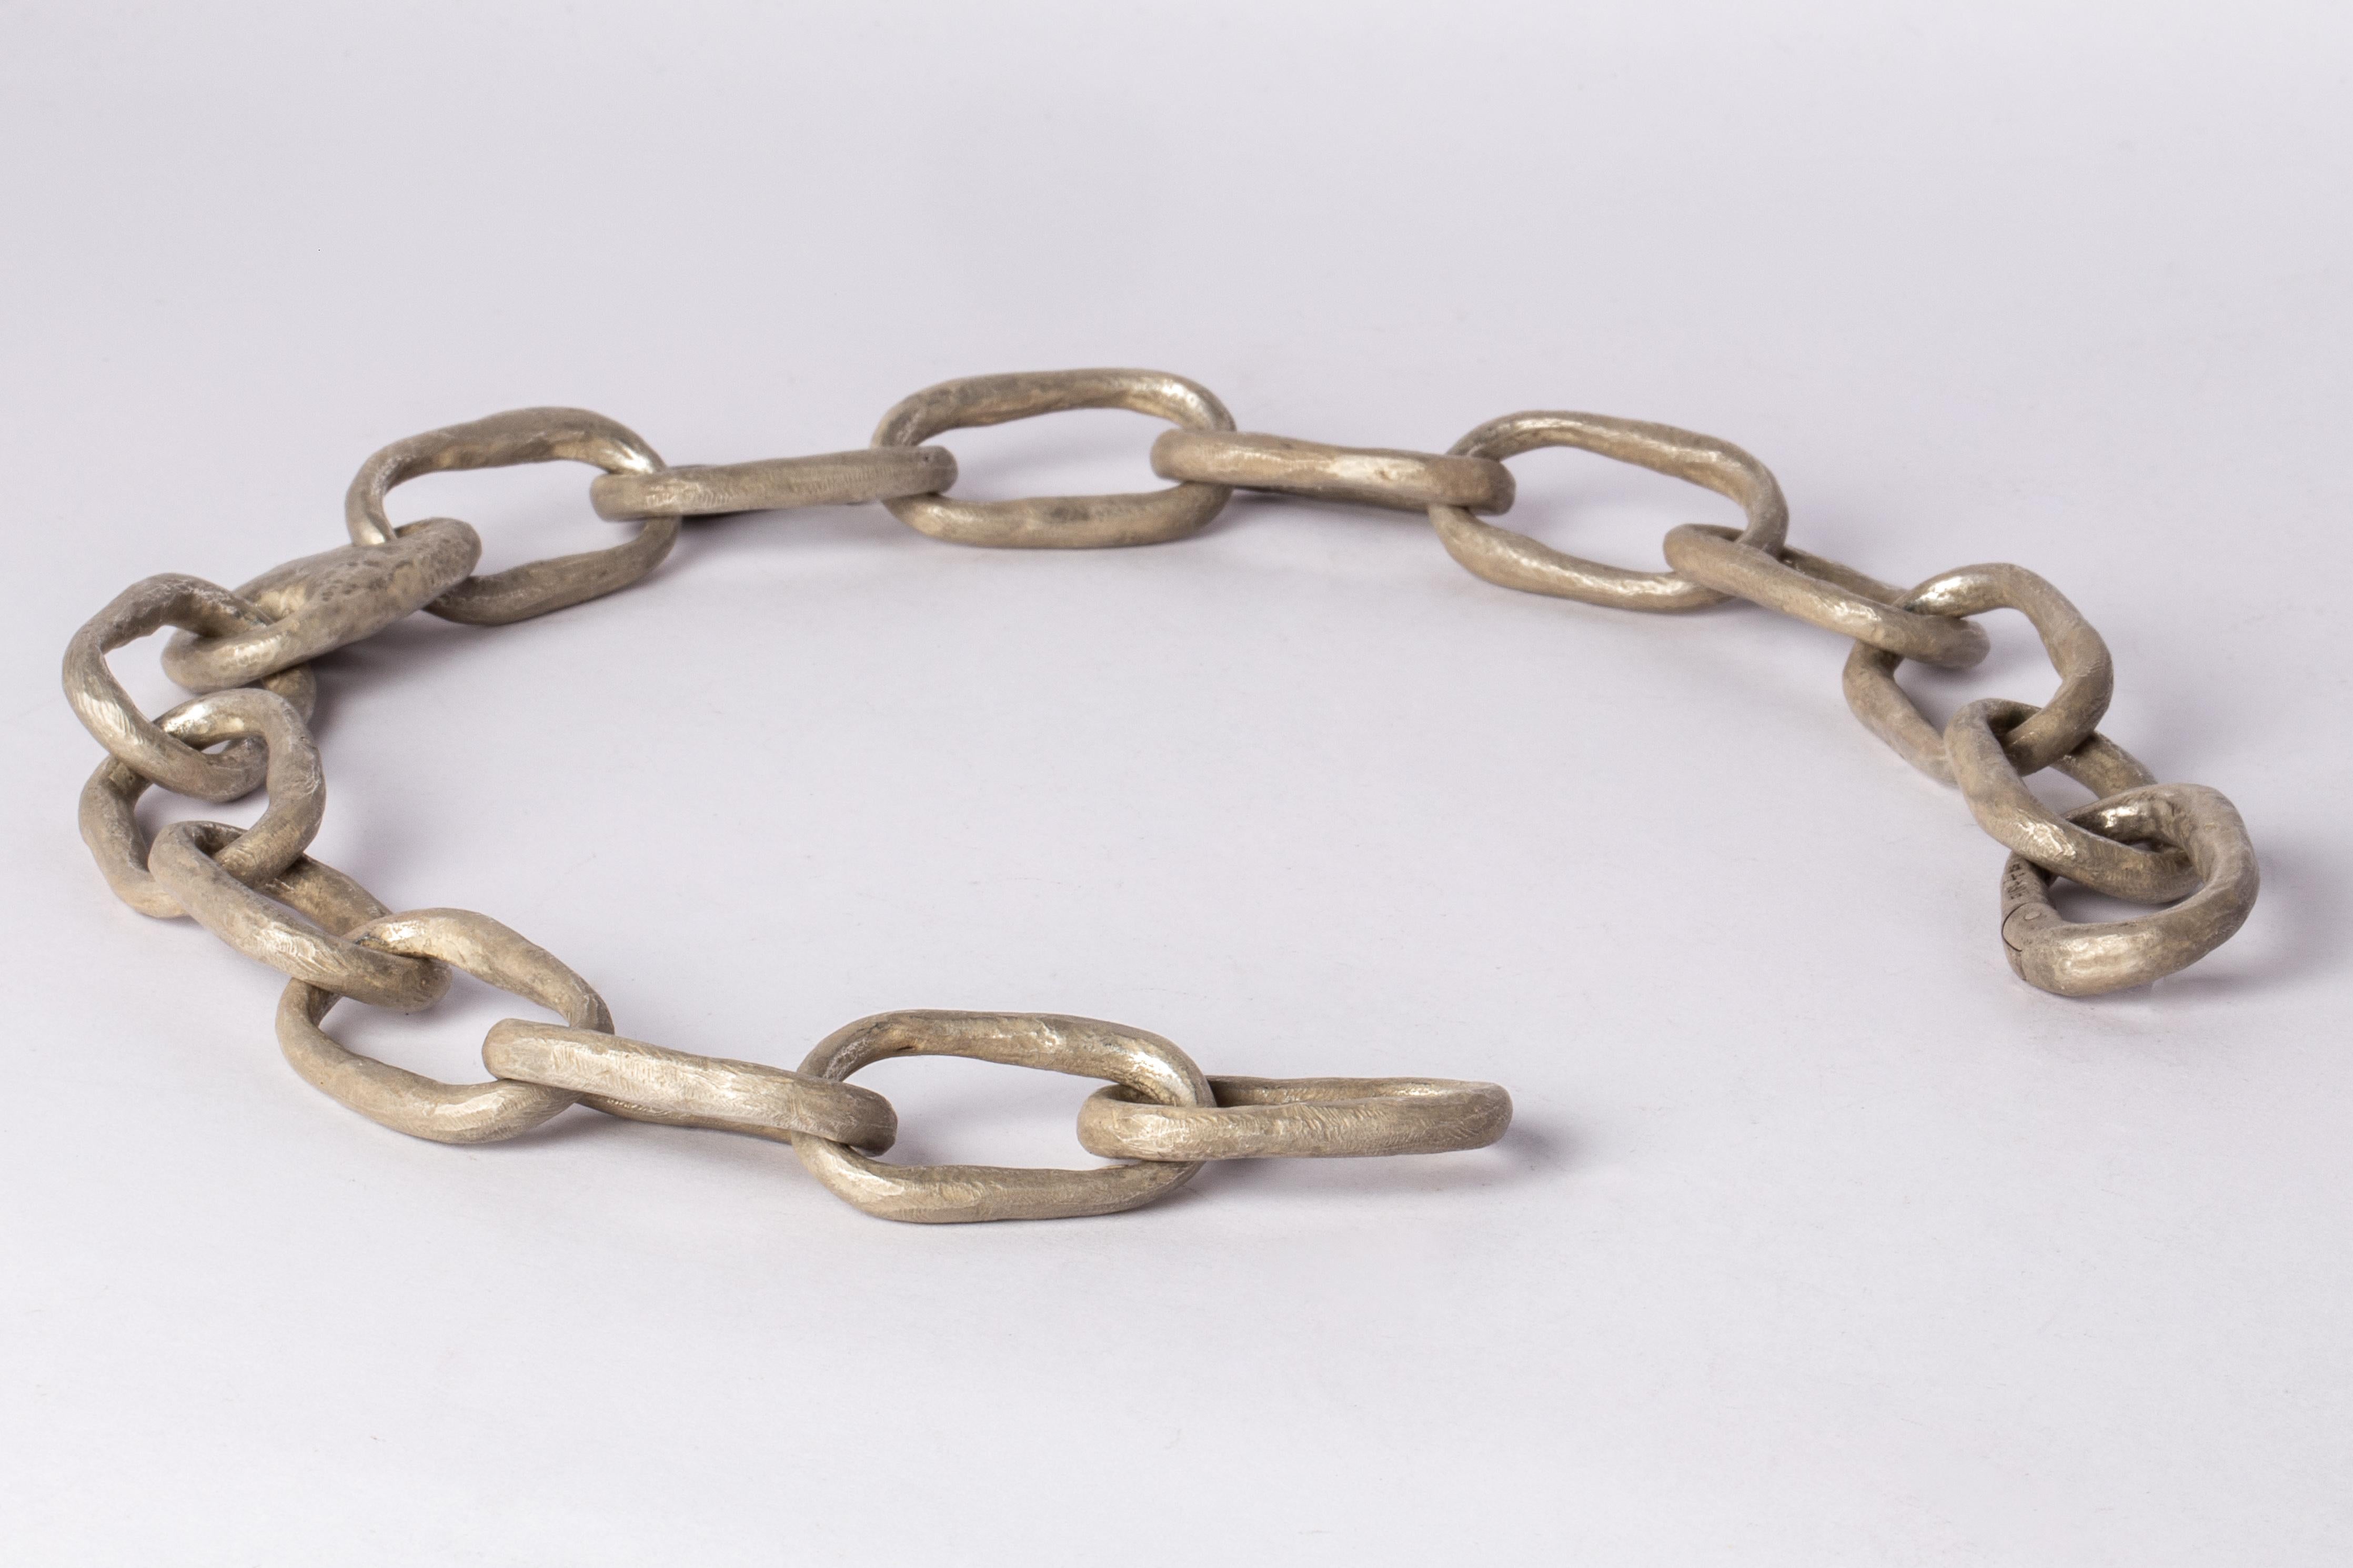 Chain necklace in acid treated sterling silver.
Chain link size (LxH): 35 mm × 22 mm
Chain length: 450 mm